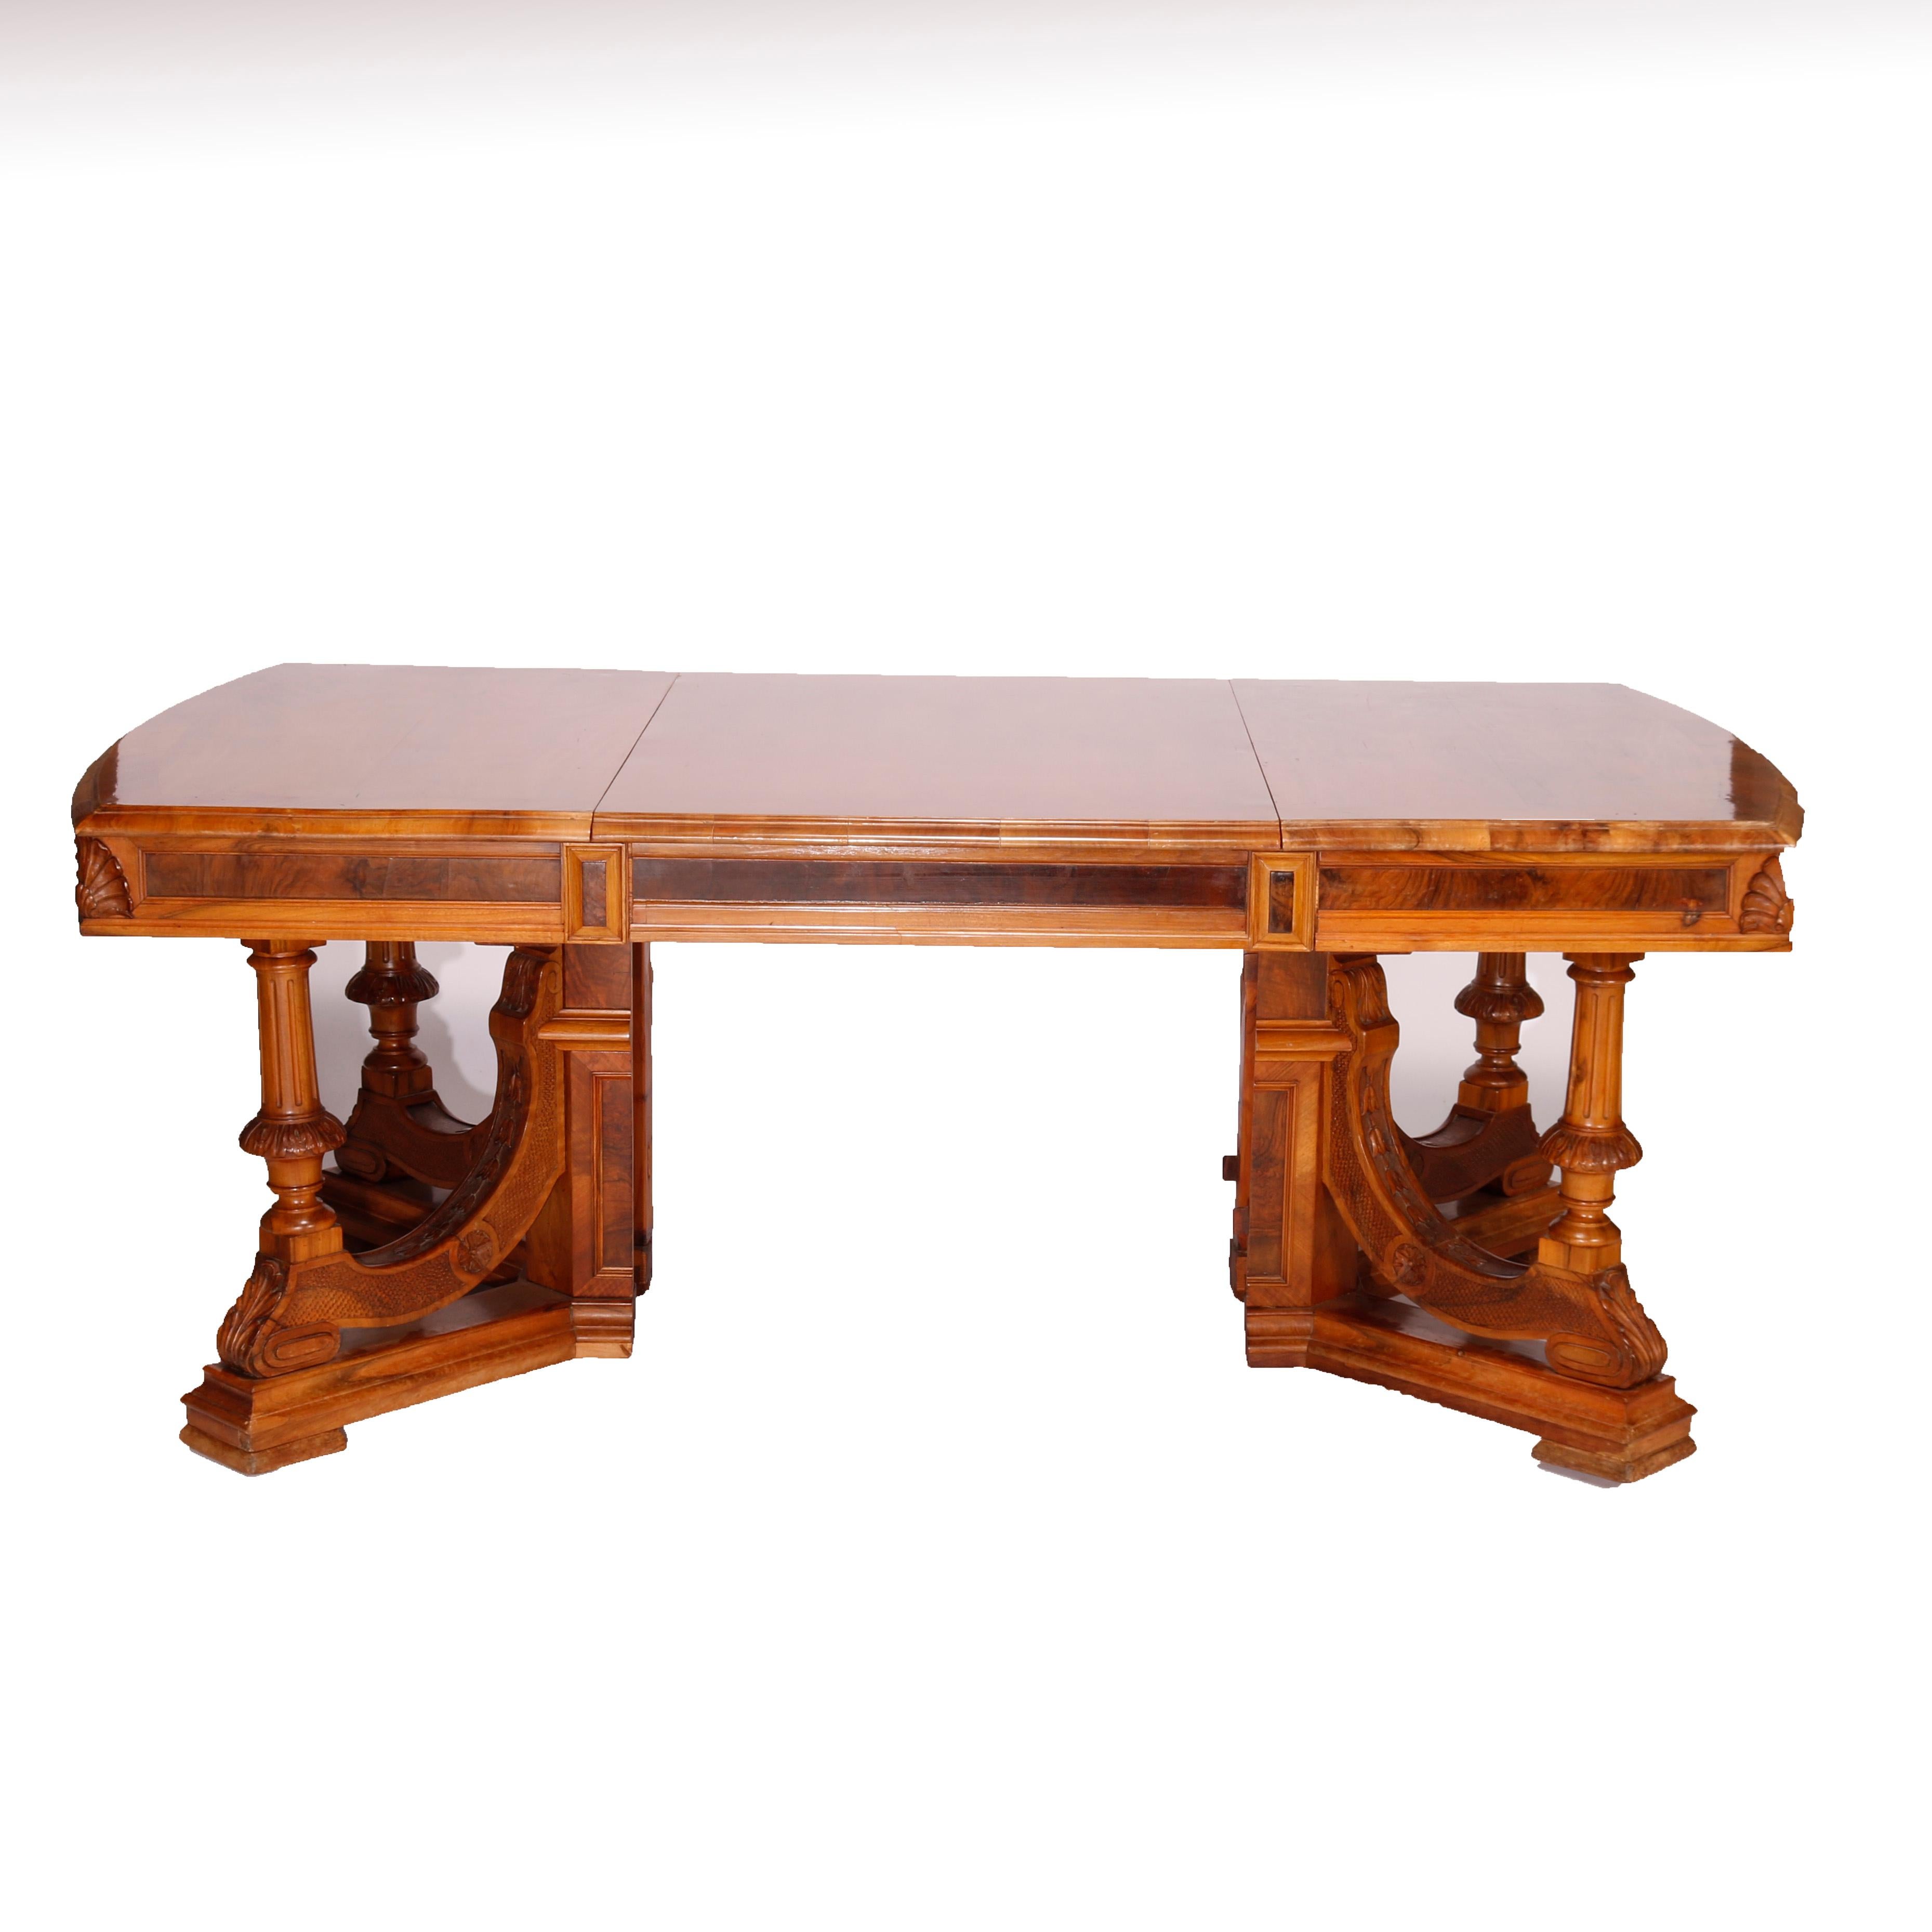 An antique extension dining or conference table offers walnut, burl and rosewood construction with shaped top having beveled edge and deep skirt, raised on carved balustrade legs seated on platform base, carved foliate and acanthus highlights